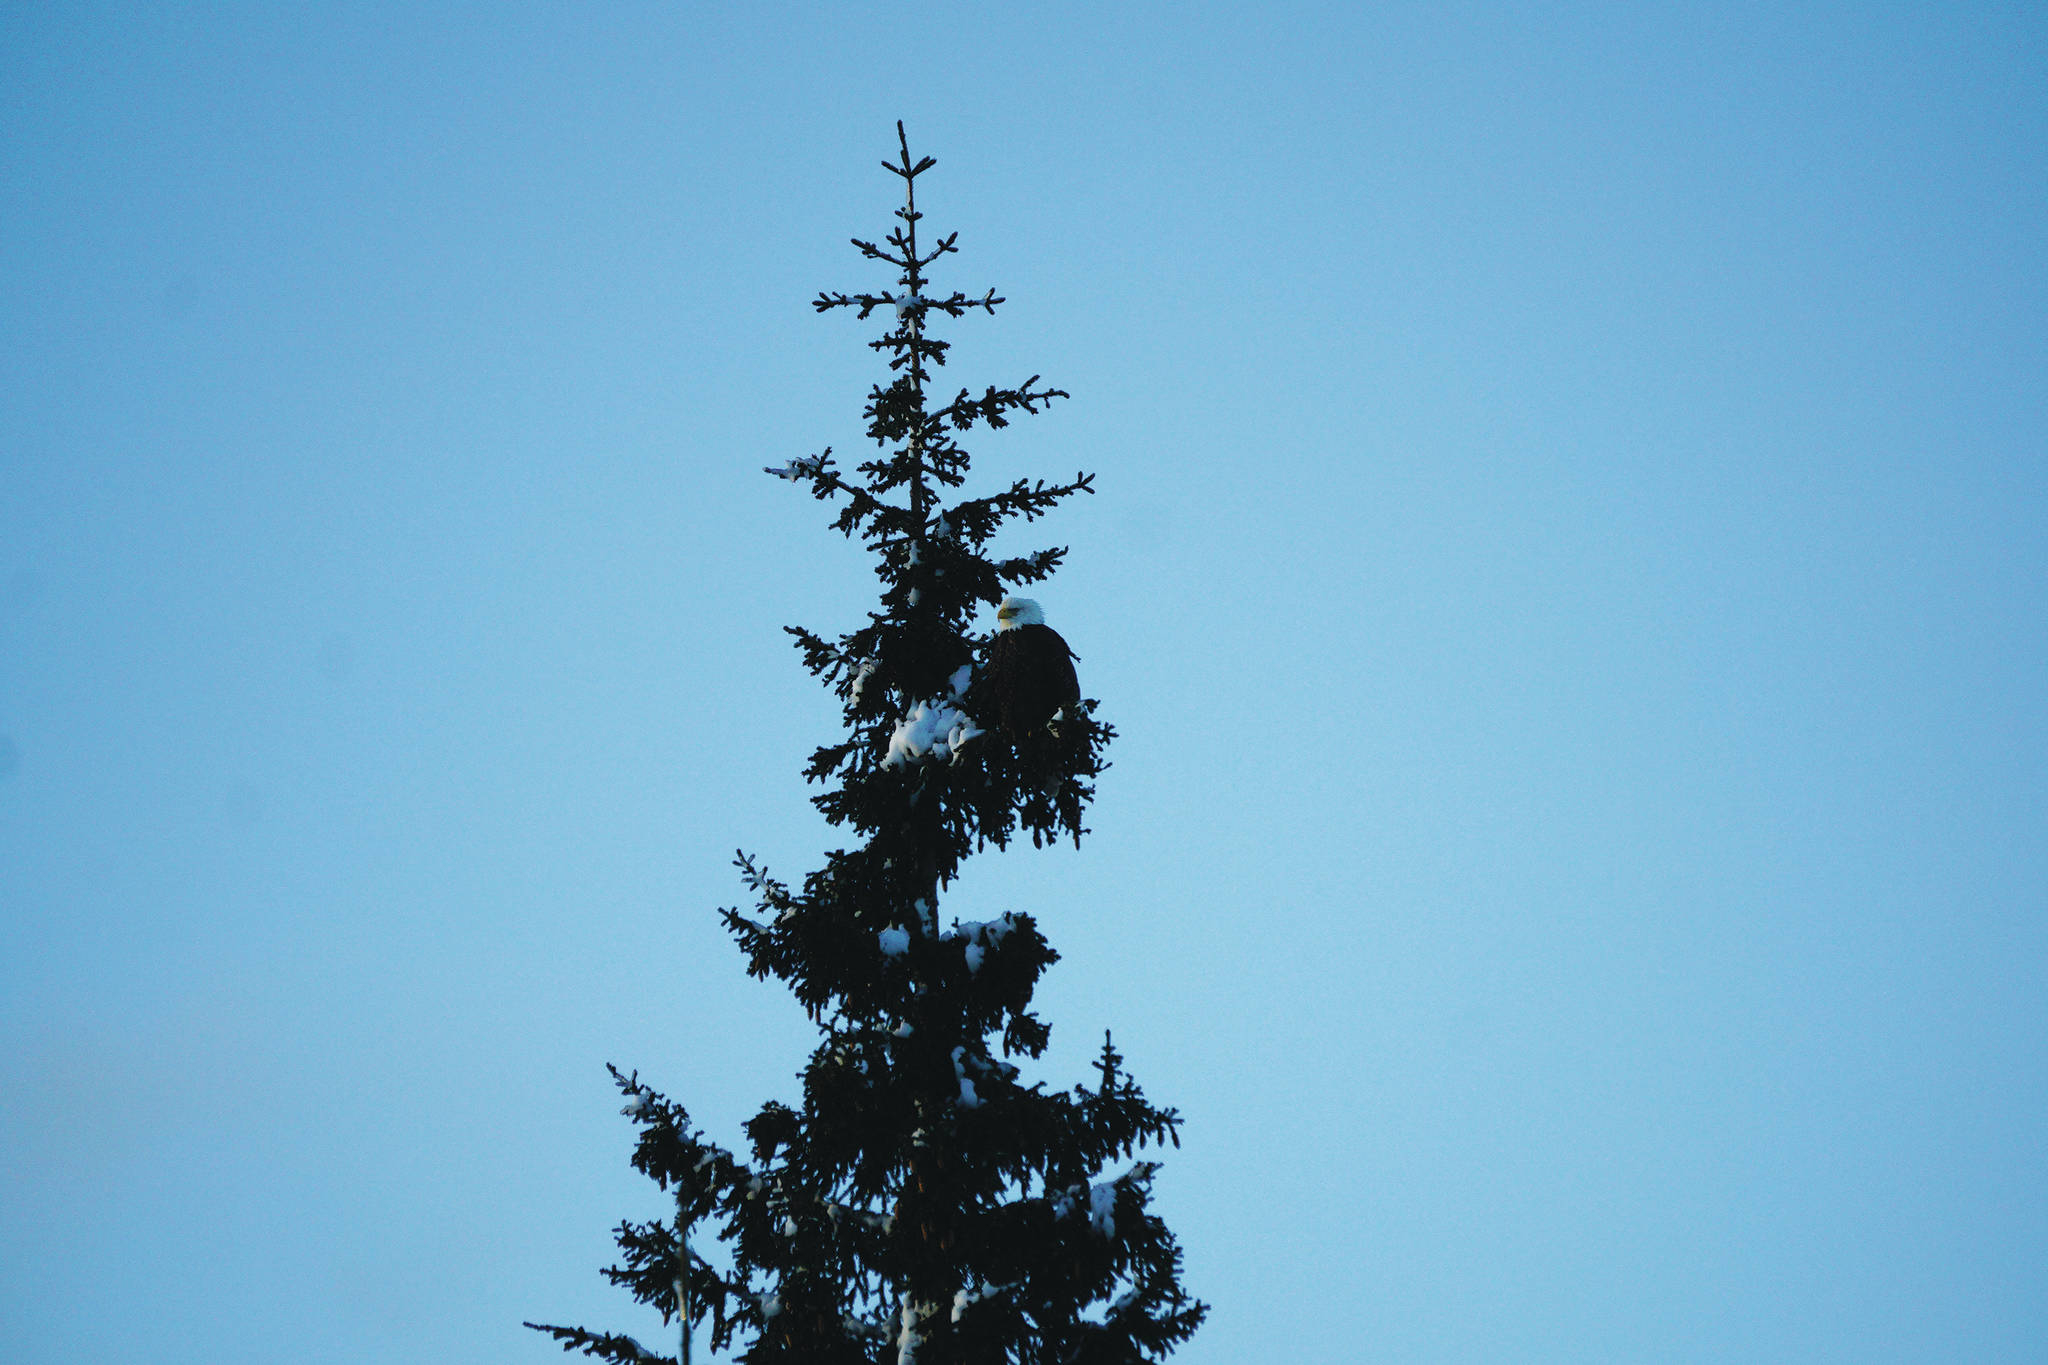 The white of a bald eagle's head makes perfect camouflage while sitting in a snow covered spruce tree on Jan. 19, 2021, on Diamond Ridge in Homer, Alaska. (Photo by Michael Armstrong/Homer News)